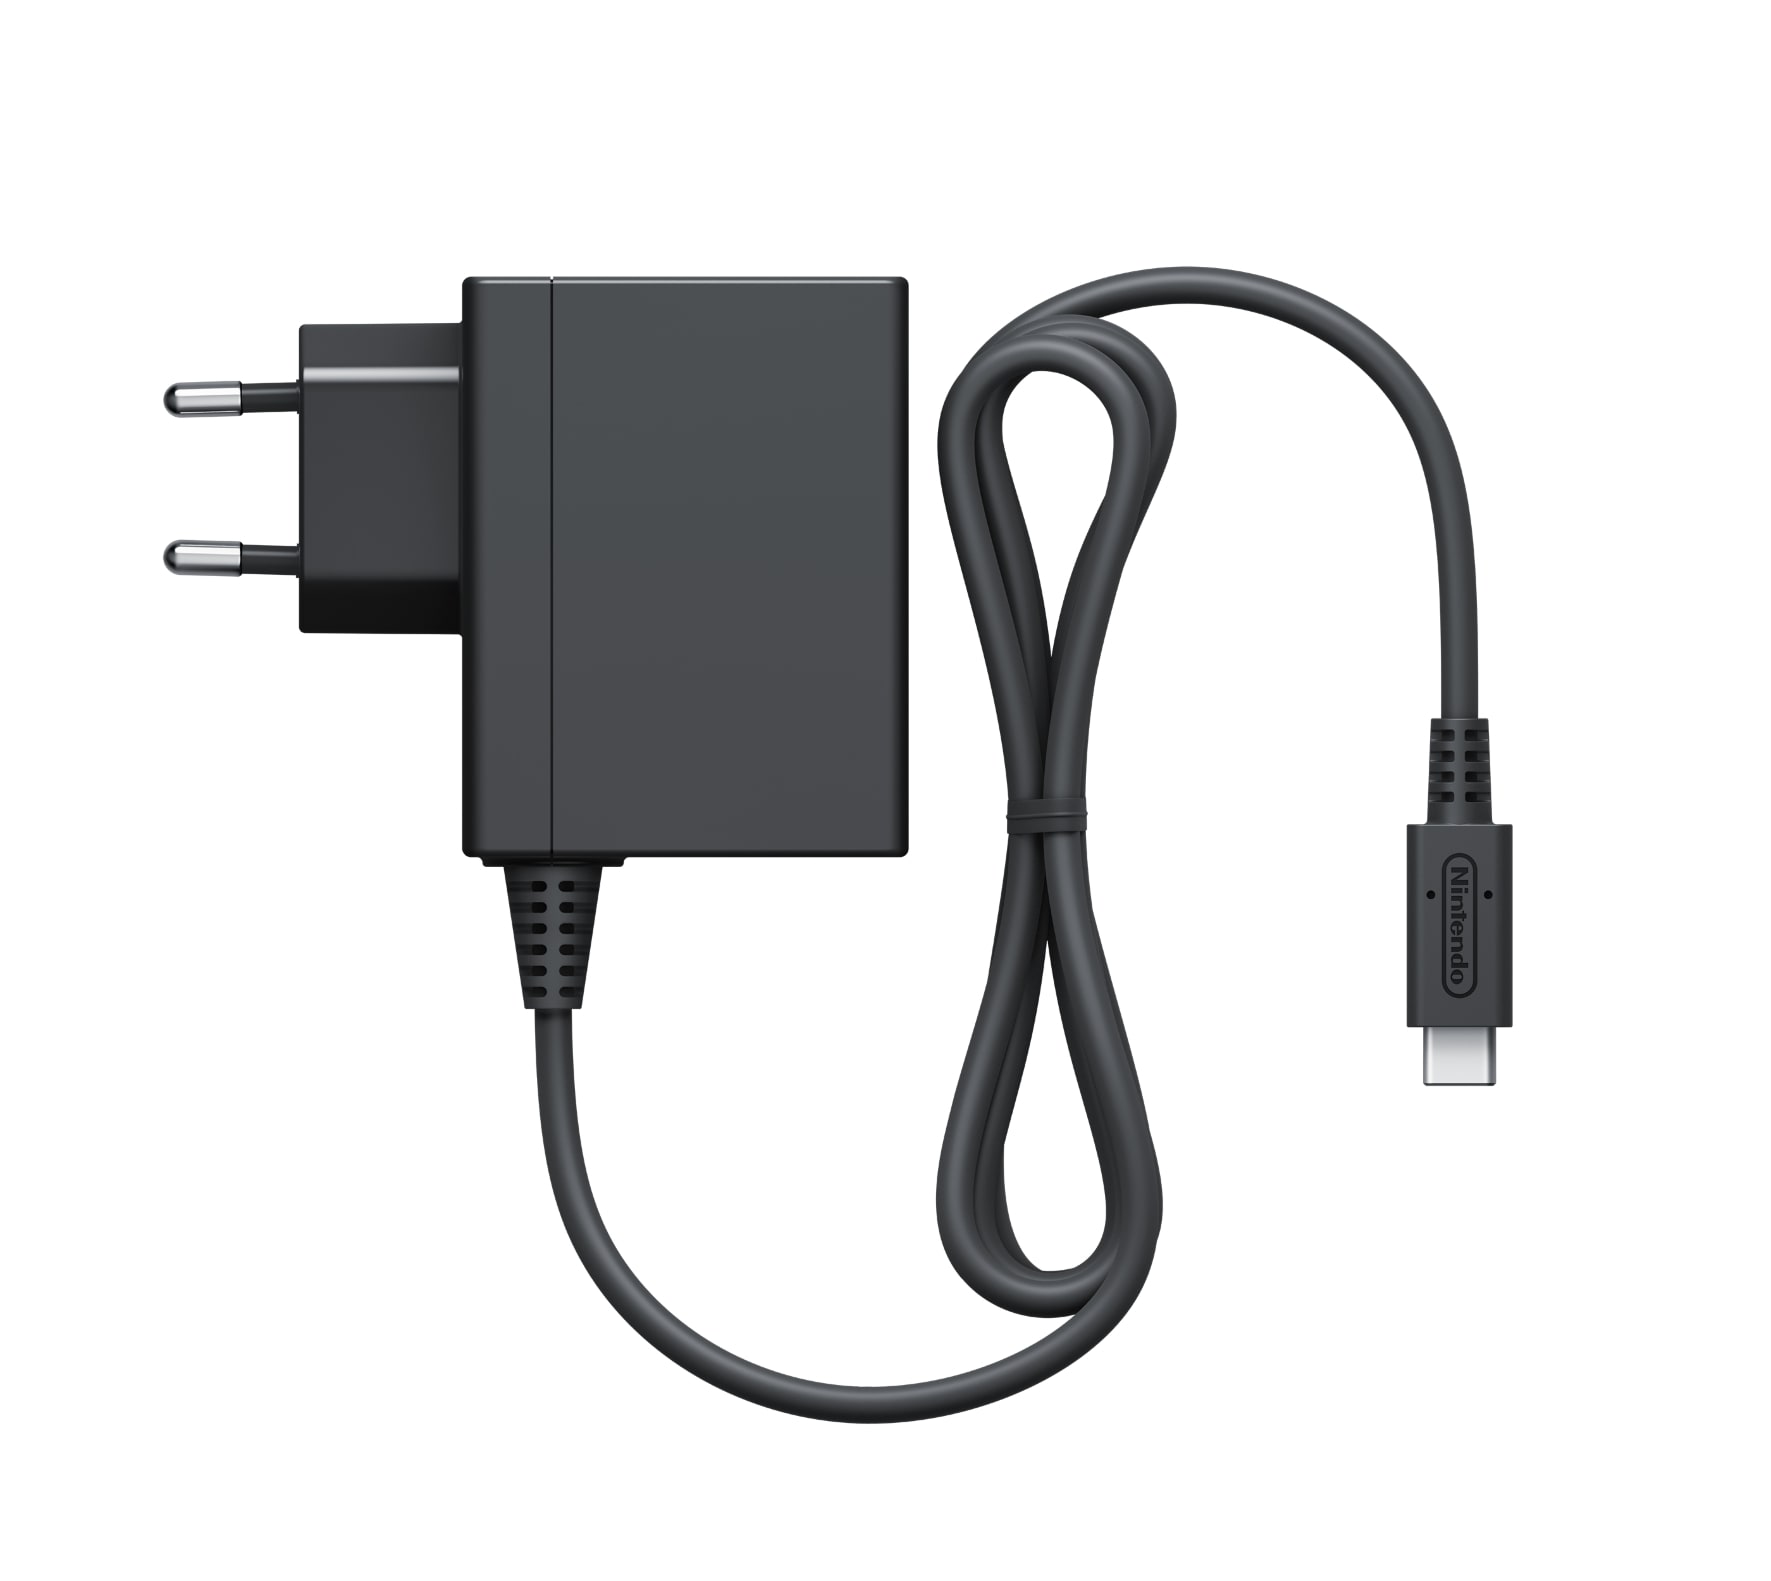 AC Adapter side view image